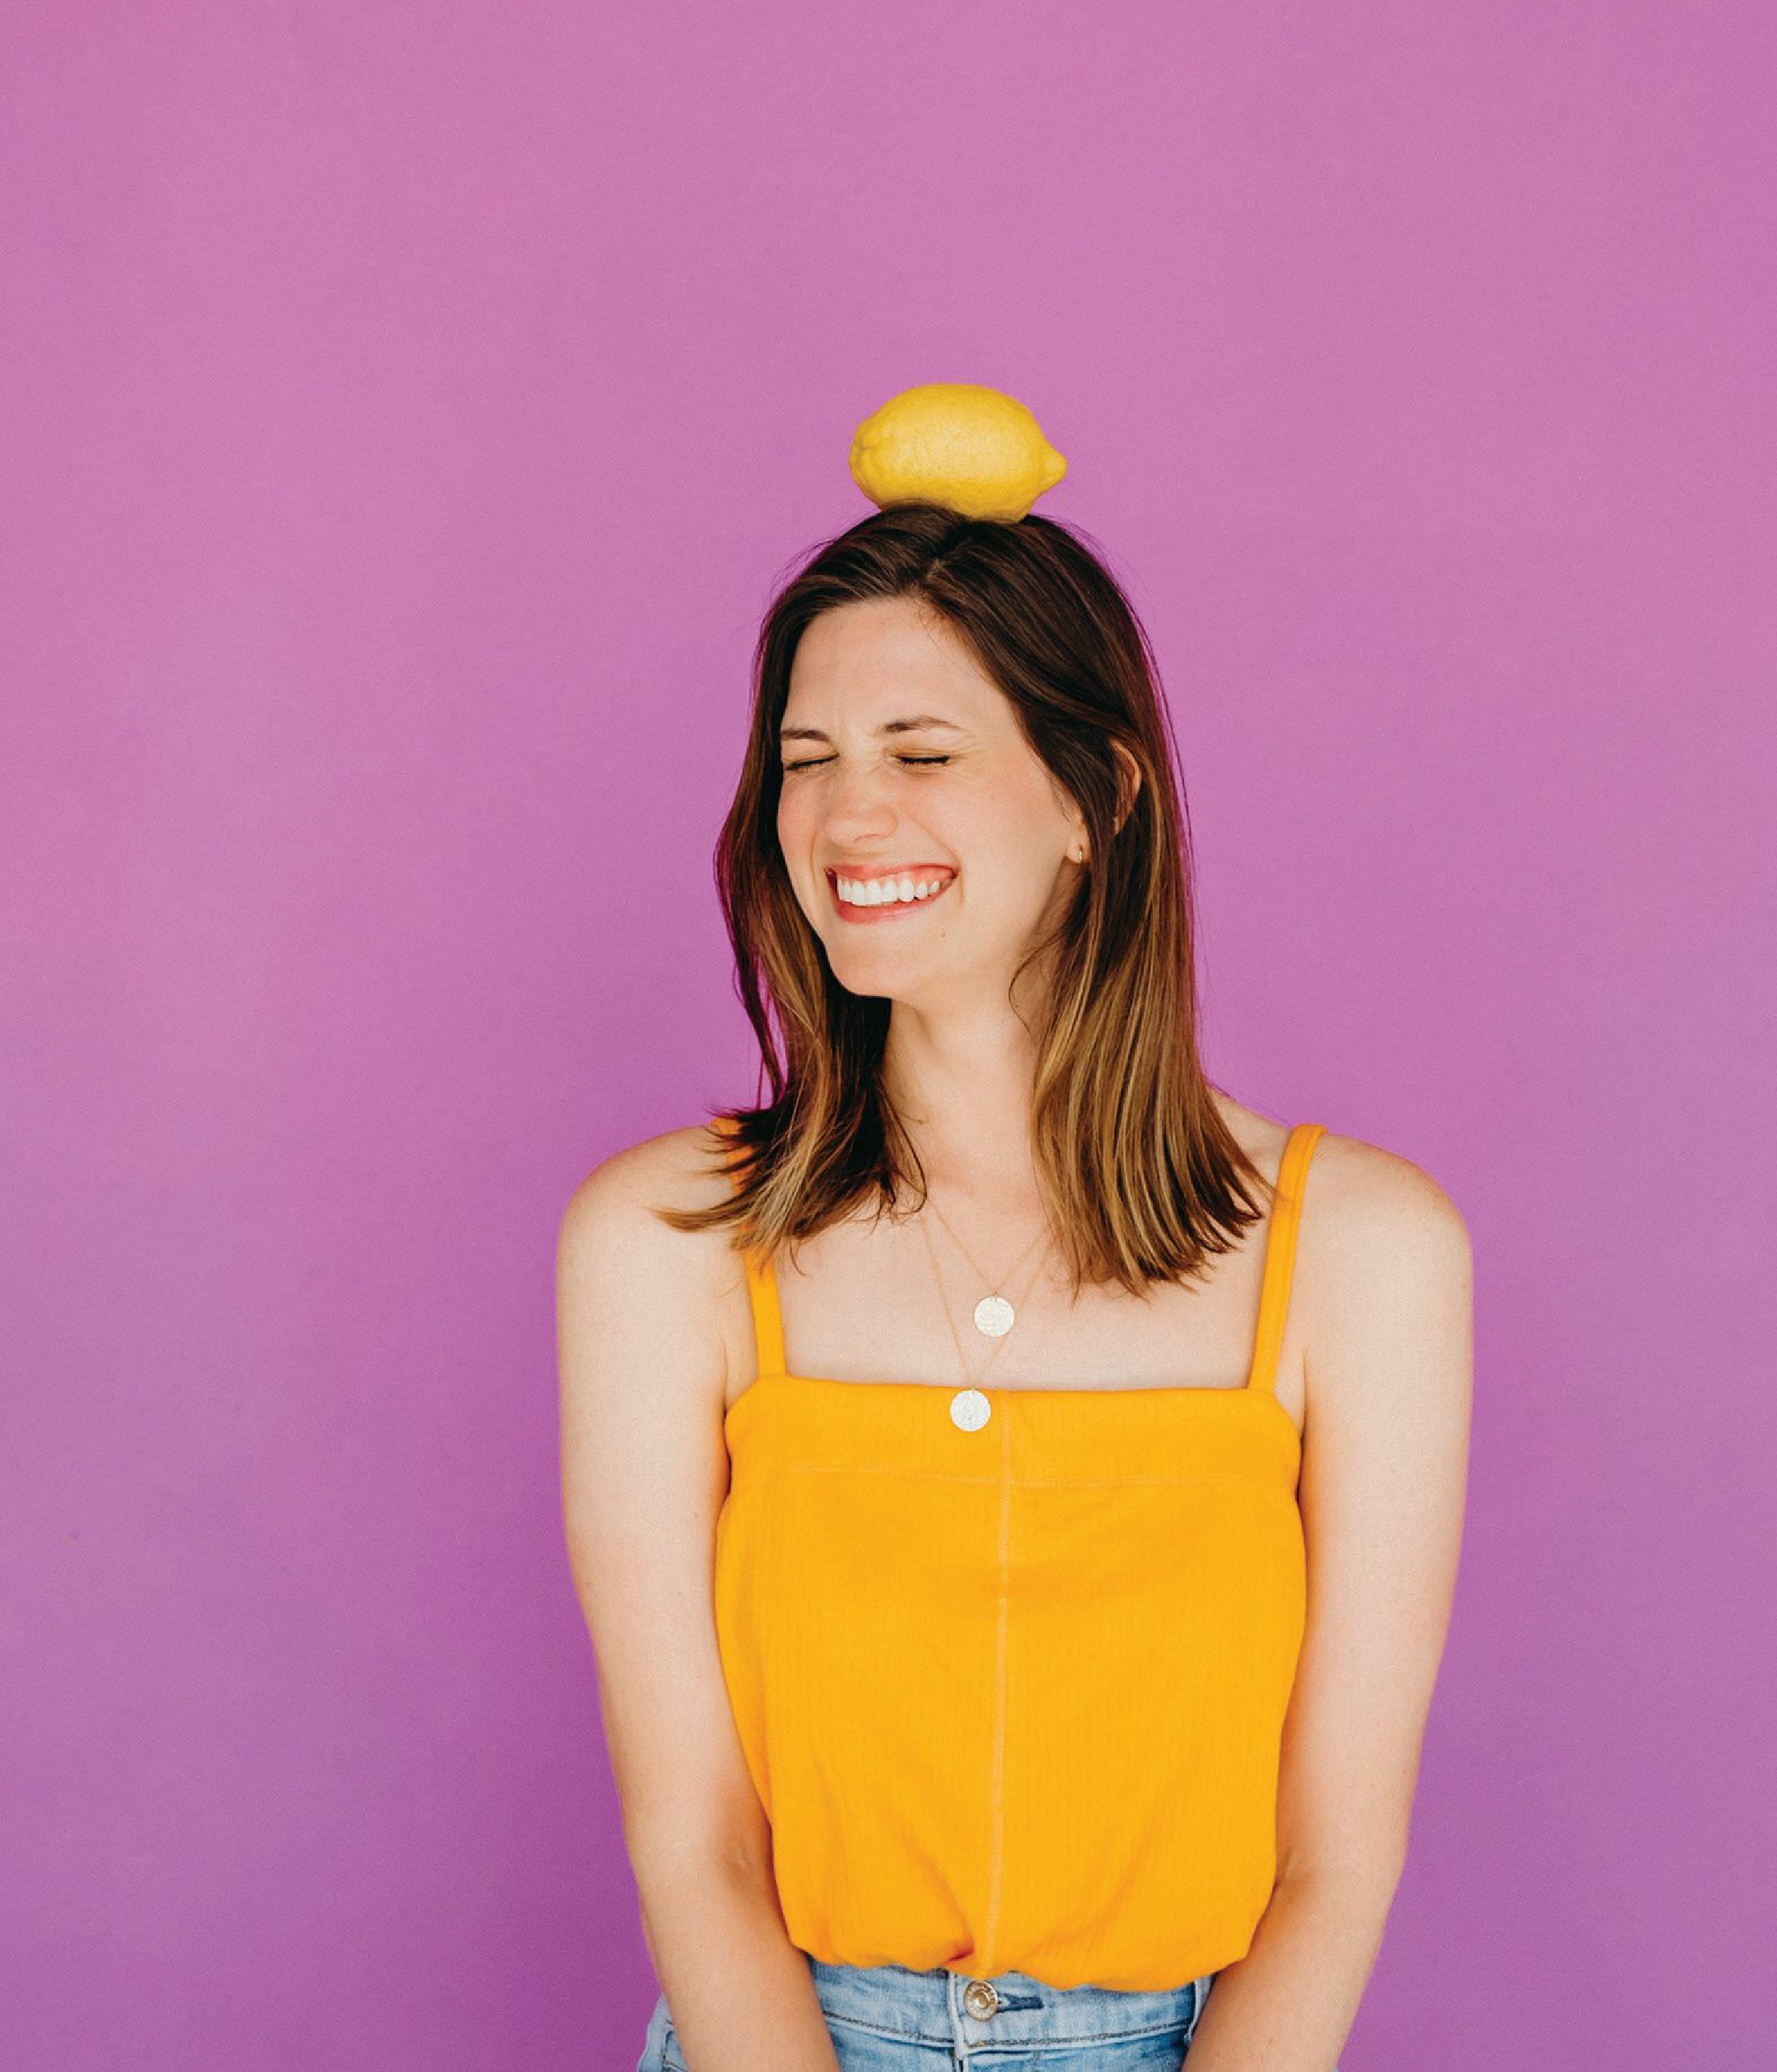 Having recently launched a new market entity called The Feel Good Group, Barbles works hard to achieve her dreams of connecting people for a fruitful experience. PHOTO BY BETHANY BREWSTER OF BETHANY TAKES PHOTOS